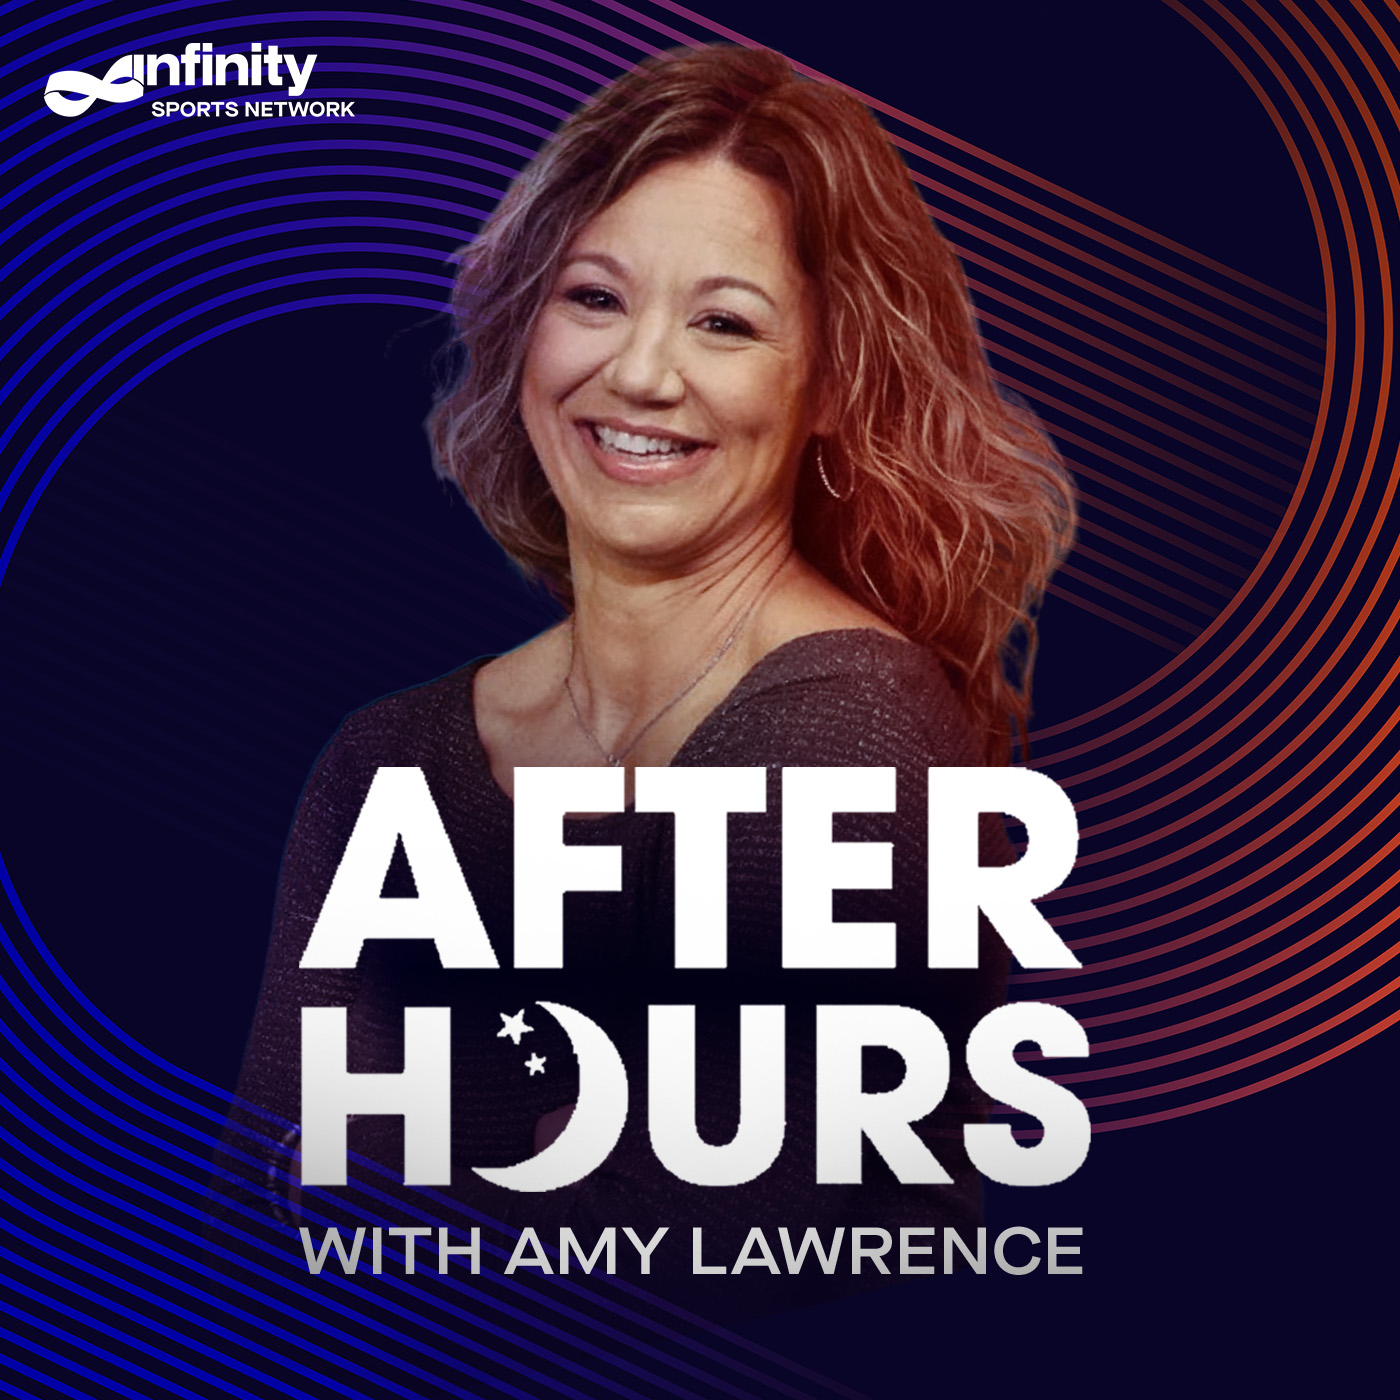 9-17-21 After Hours with Amy Lawrence PODCAST: Hour 3